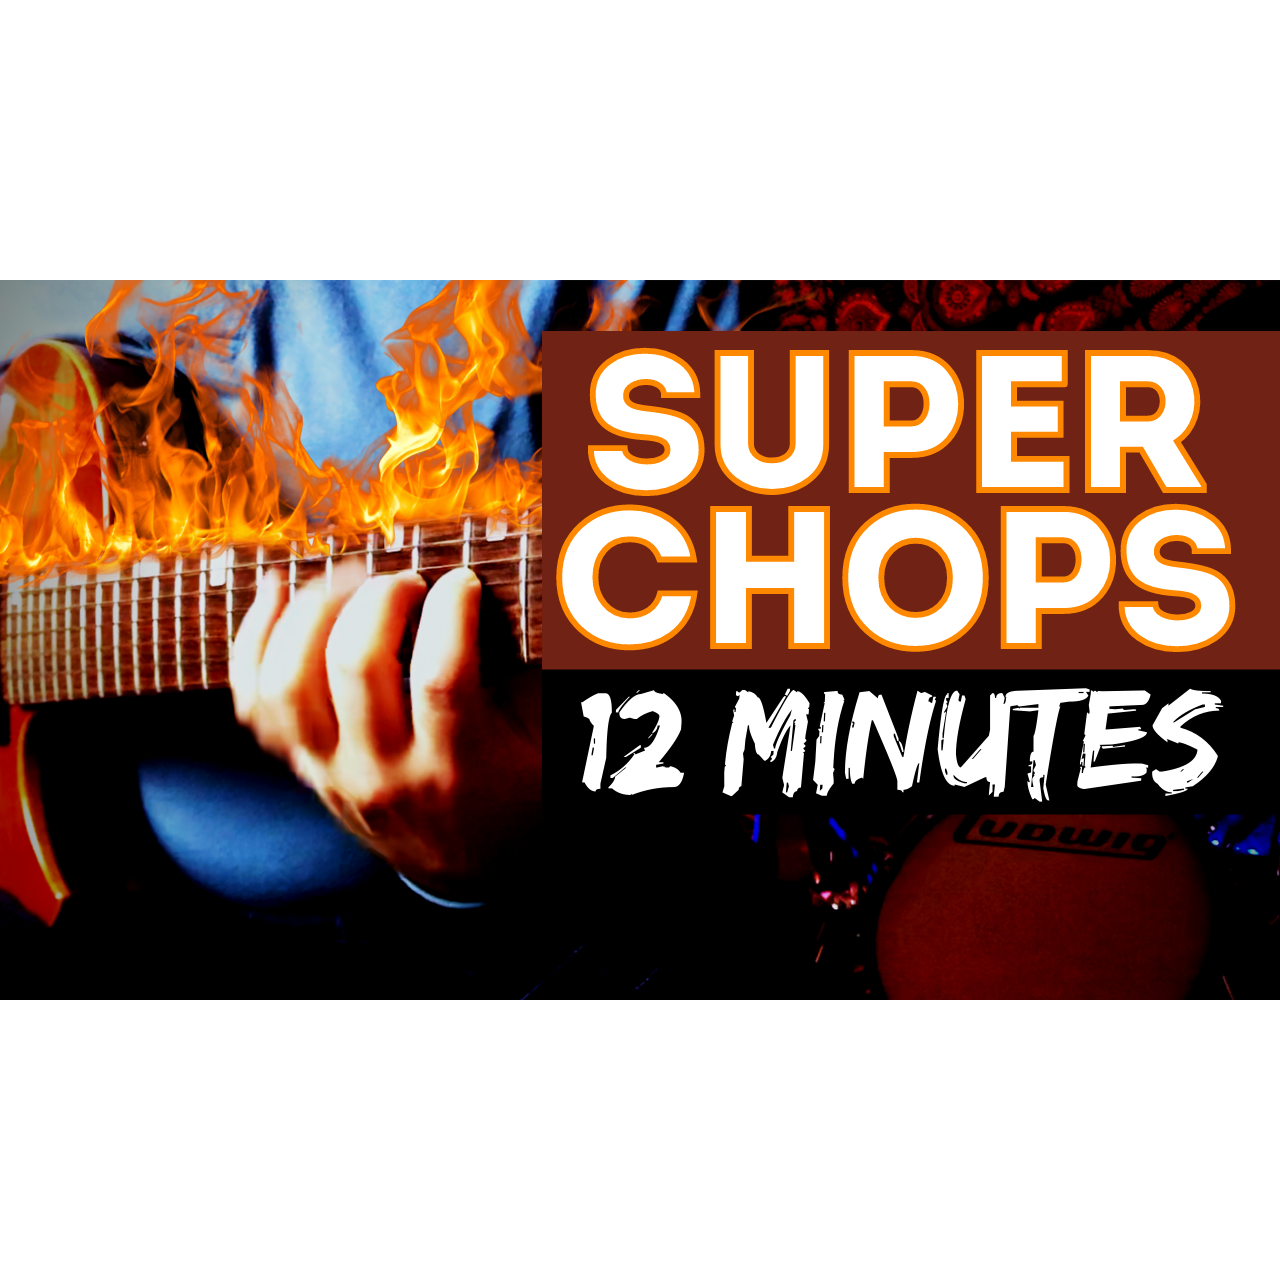 Great Guitar Technique: Get Super Chops! Do This For 12min Every Day